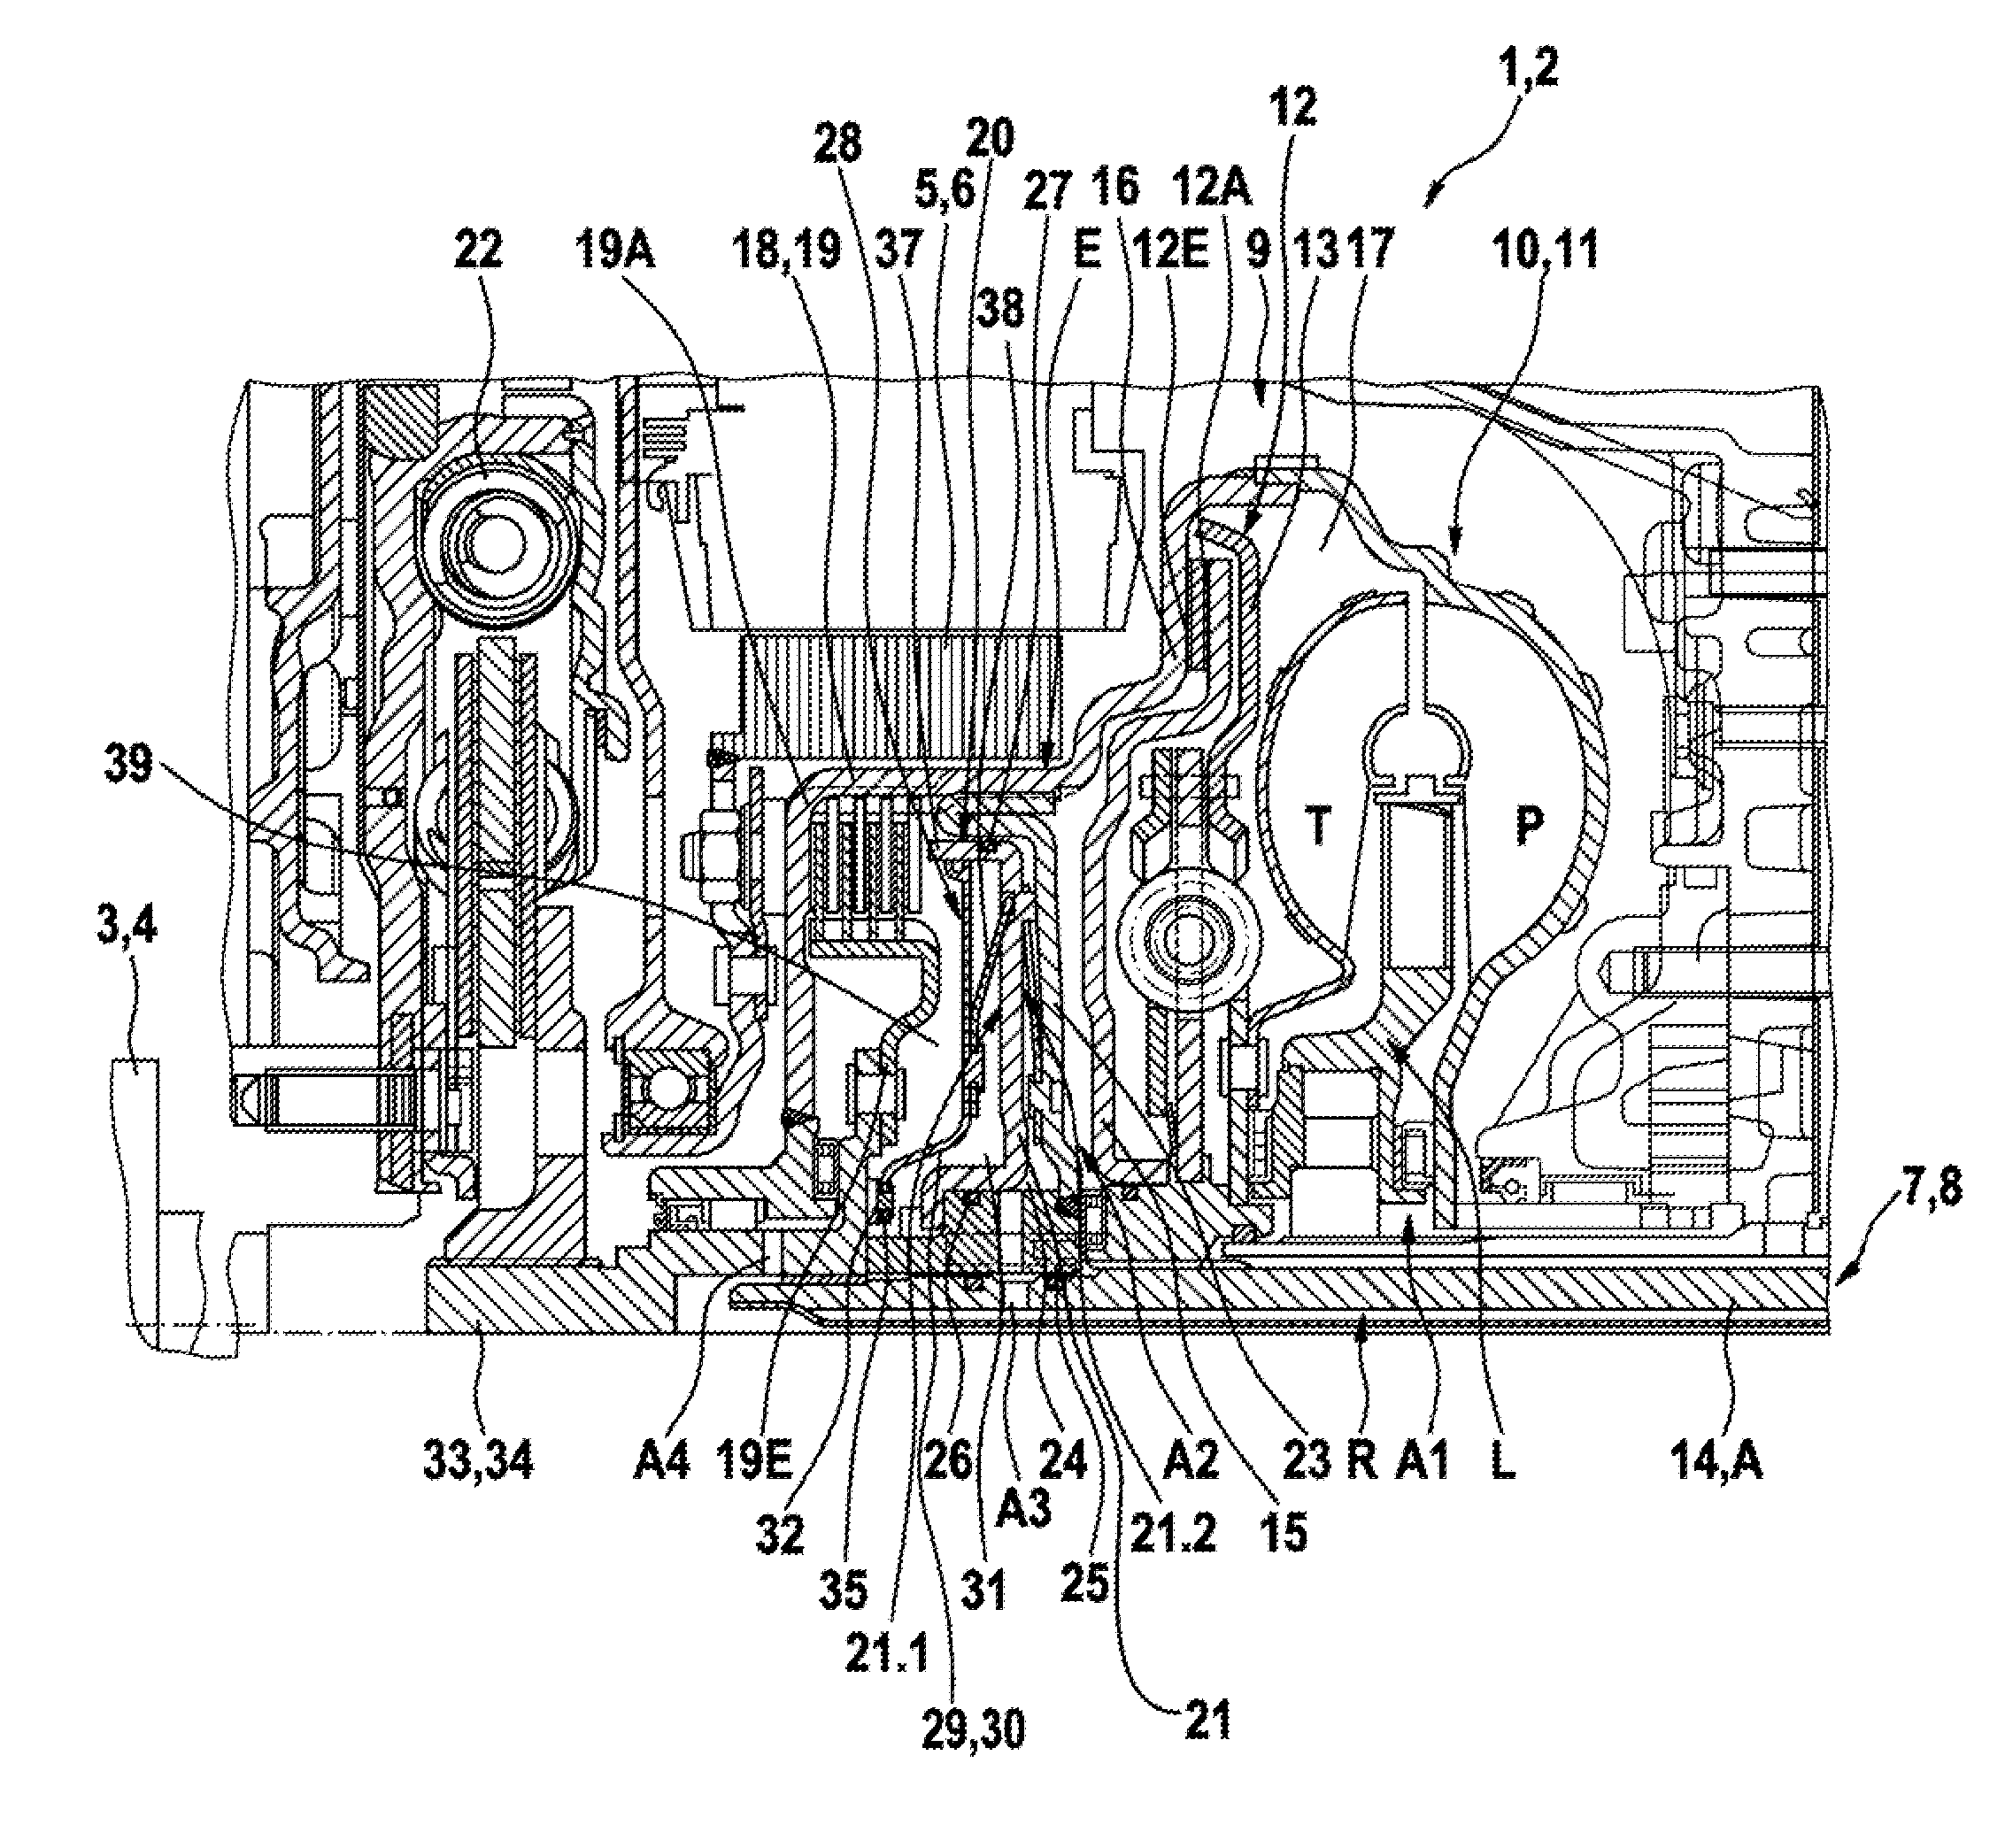 Combined power transmission, drive unit and drive train for a hybrid system